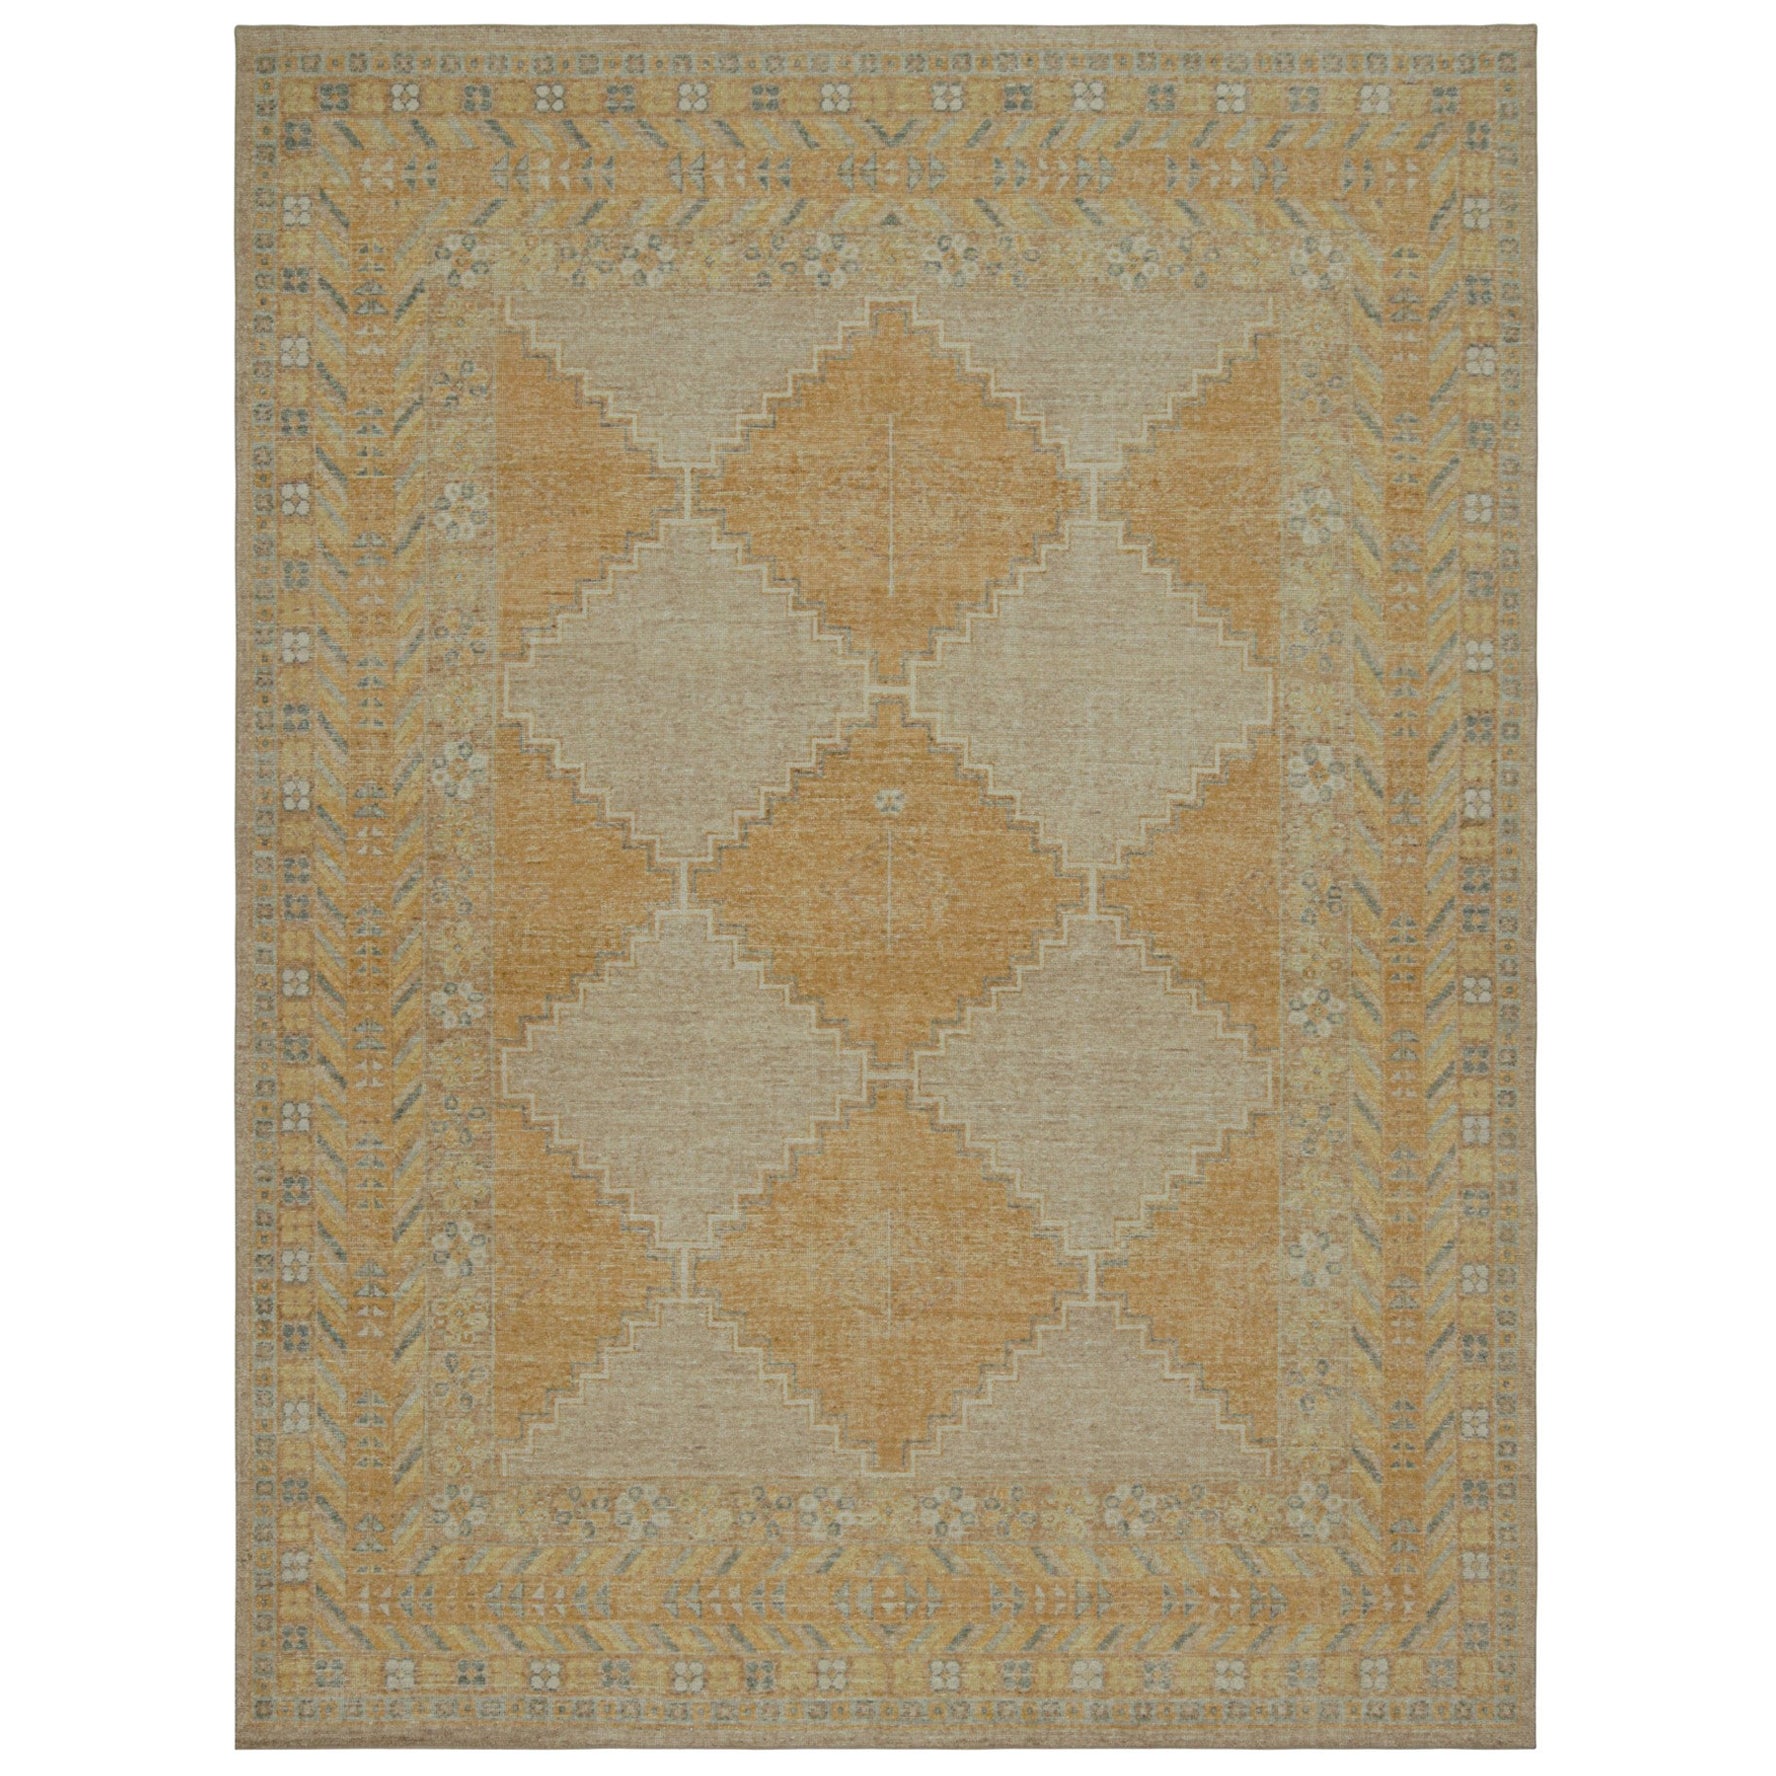 Rug & Kilim’s Modern Rug in Beige and Gold Tones, with Geometric Patterns For Sale